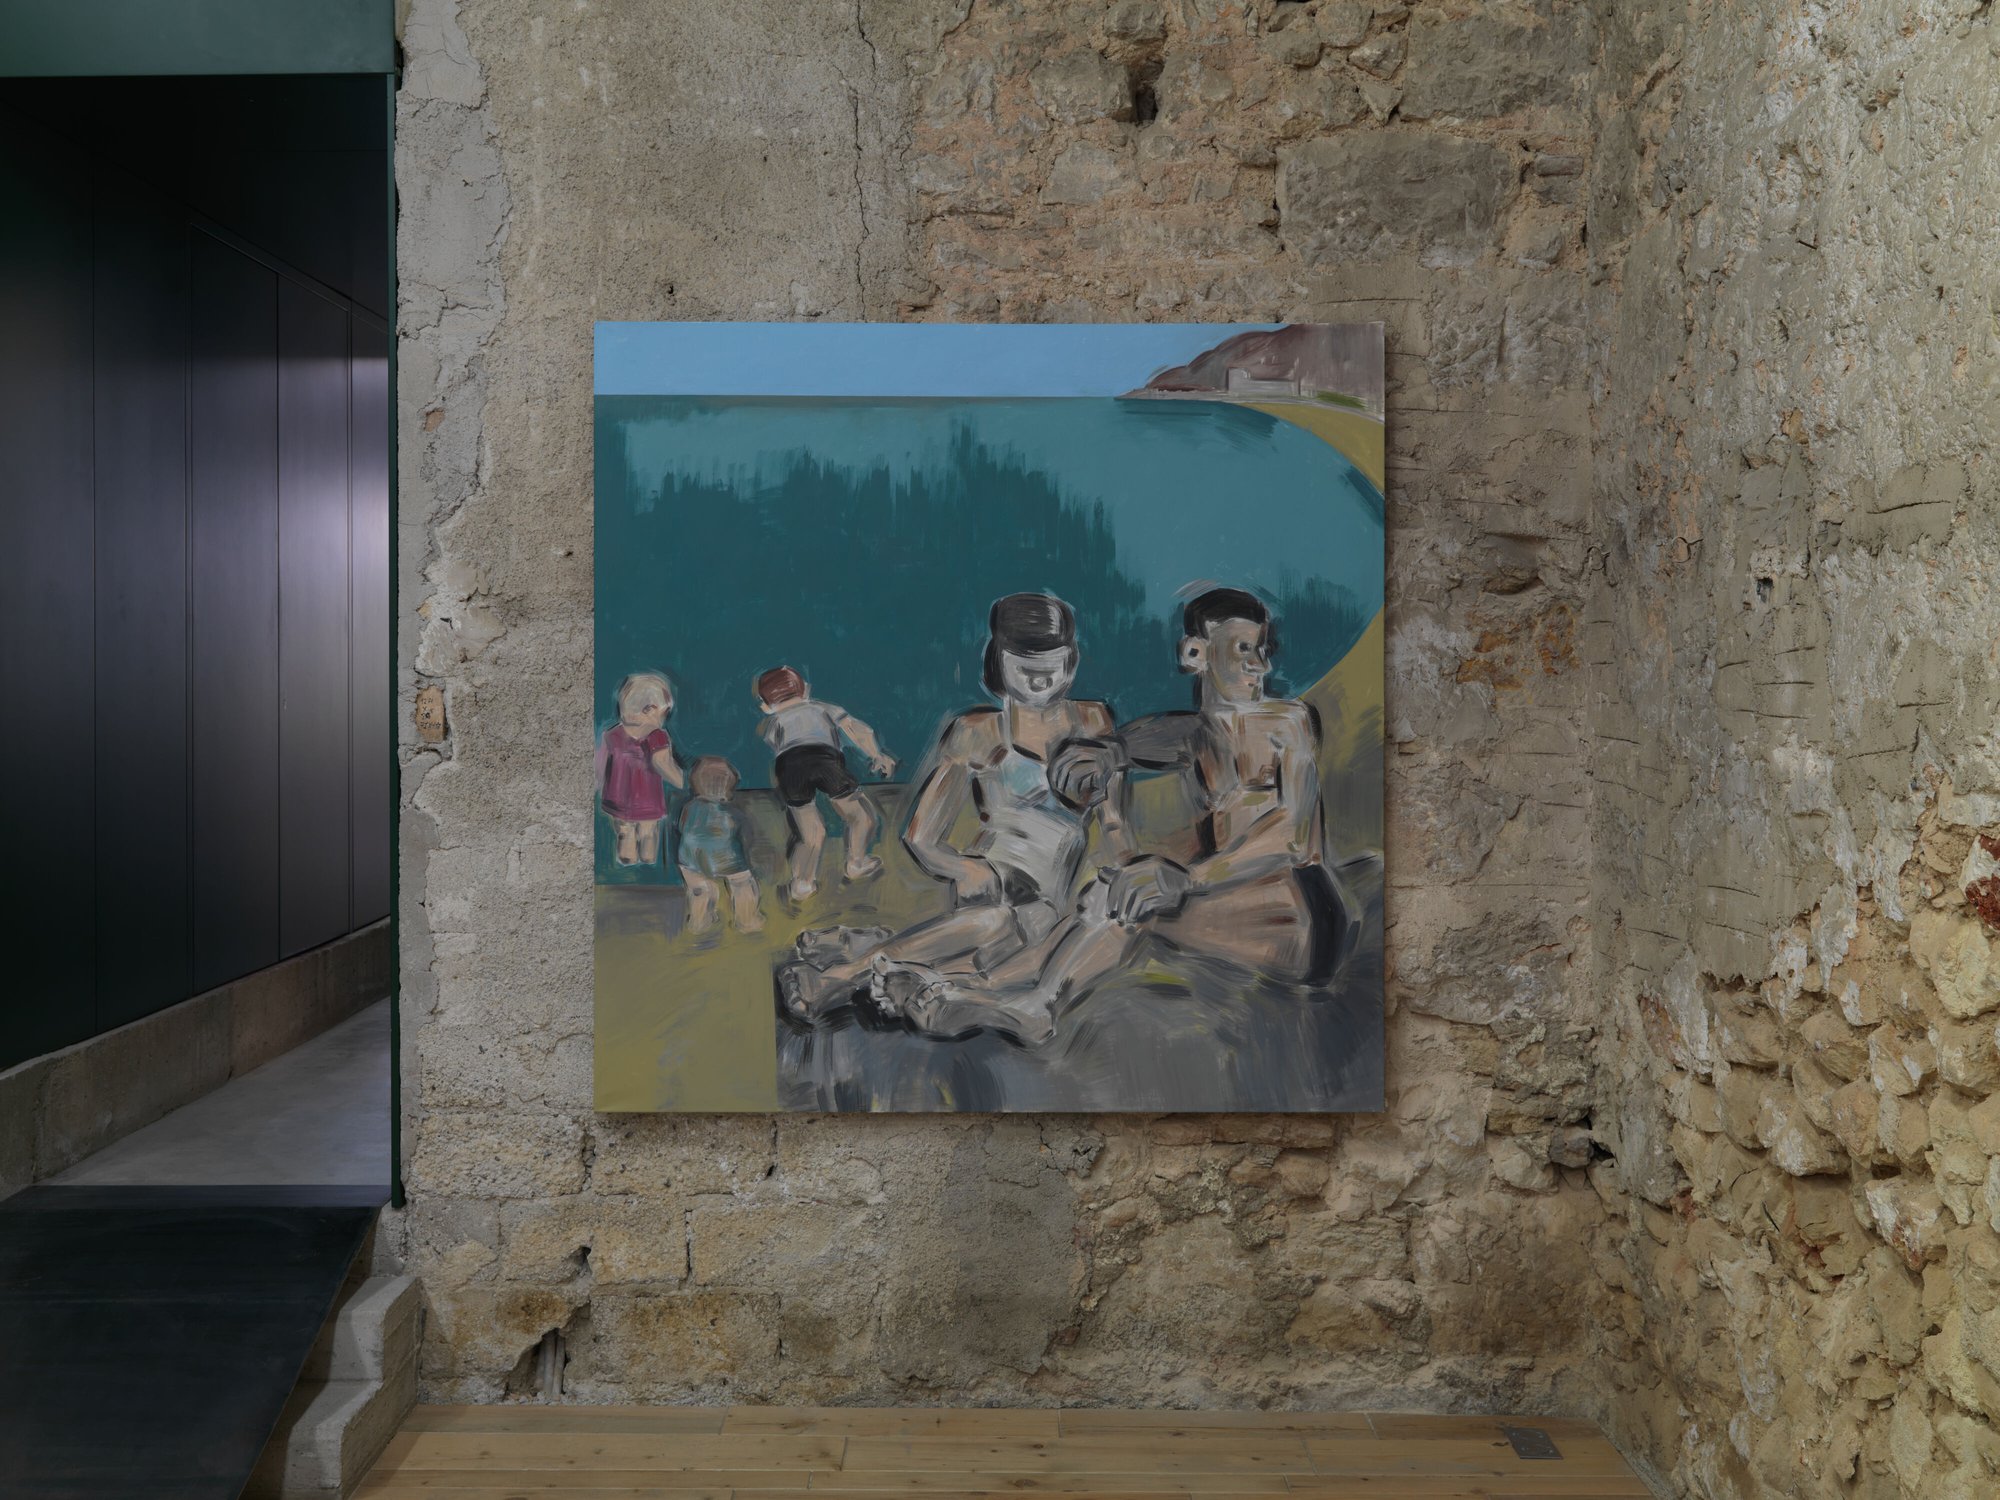 Apostolos Georgiou, Untitled, acrylic on canvas, 170 x 170 cm, 2020. Installation view, Ένας Ένας - One by One, RODEO, Piraeus, 2020